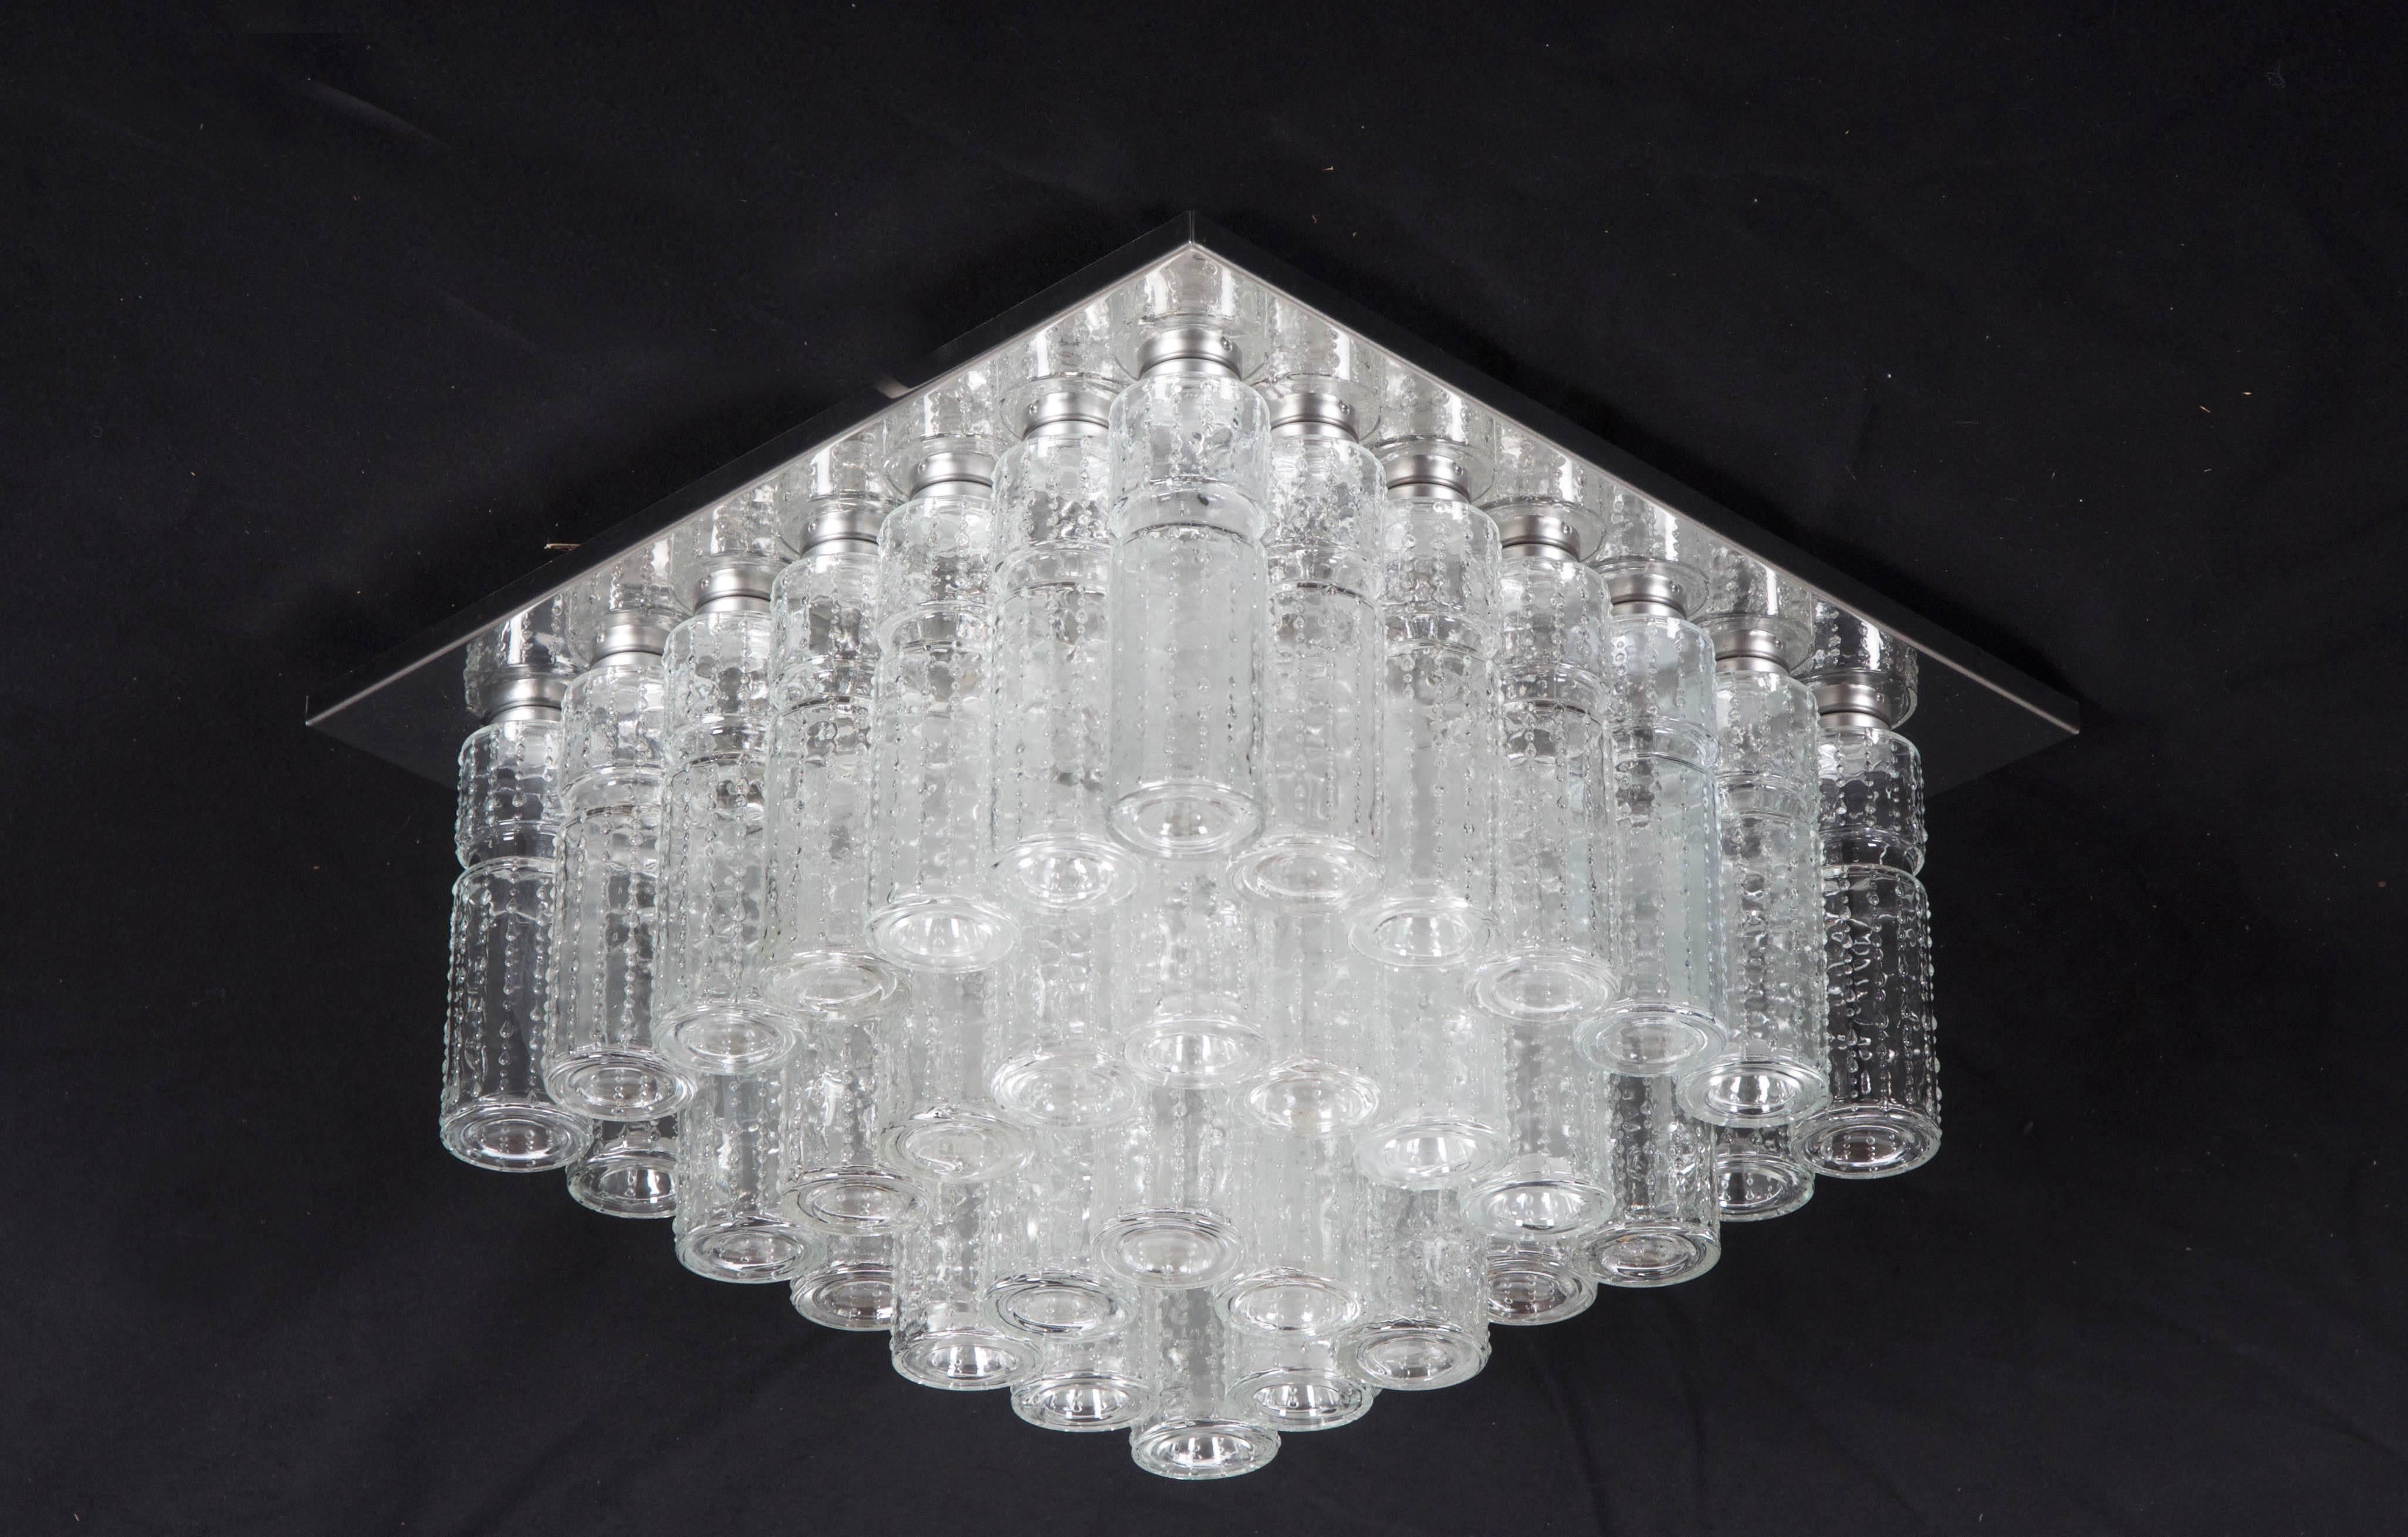 Amazing flush mount chandelier with 48 hanging hand blow textured hollow glass prisms mounted on a chromed steel frame. Made by Glashütte Limbung in Germany model number 2436 and designed by Boris Tabacoff in the 1970s.
Excellent original